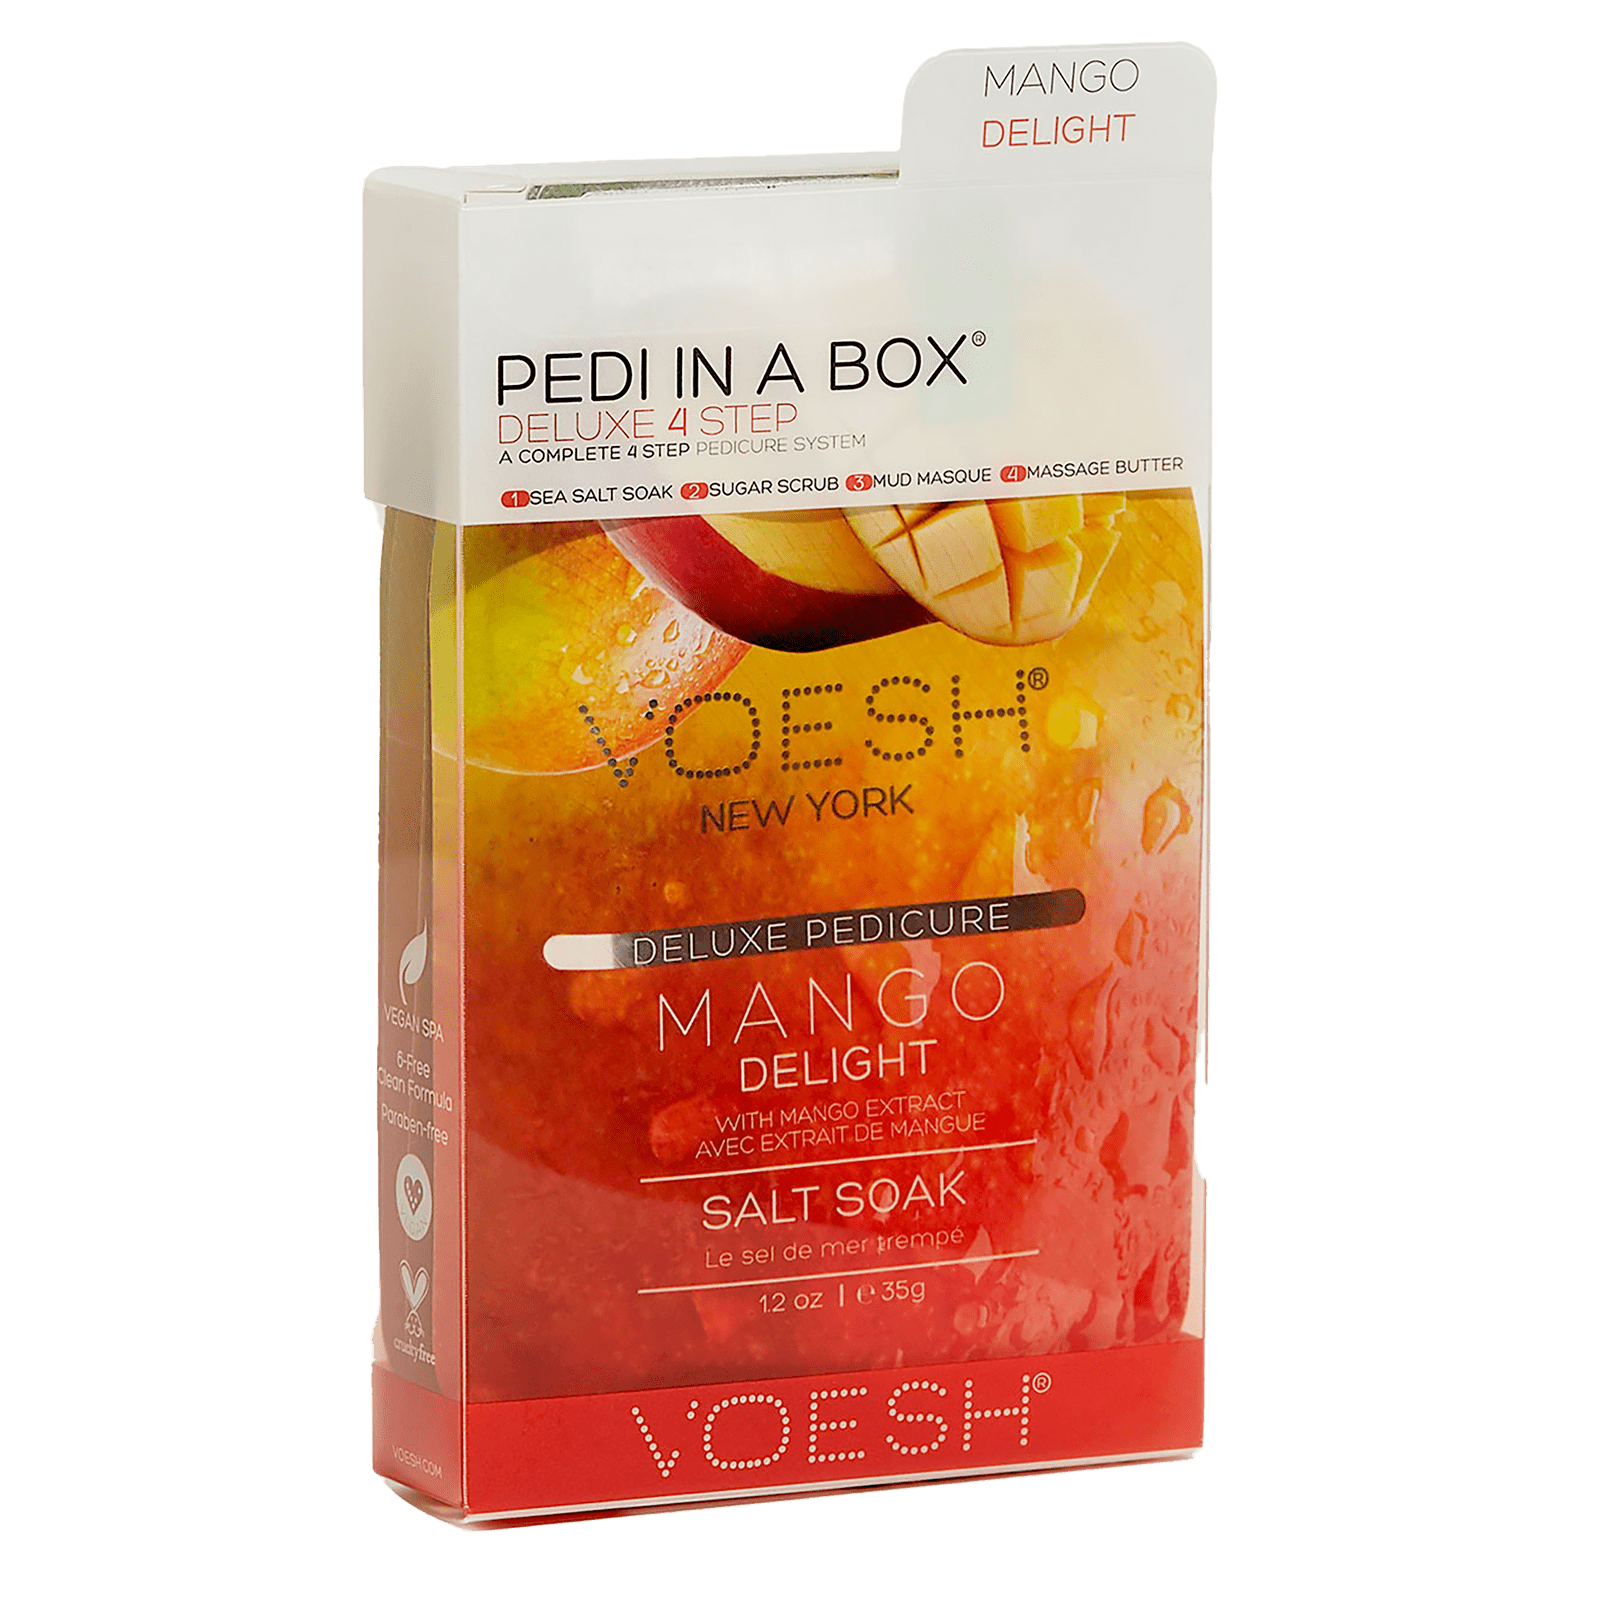 Voesh - Pedi in a Box Deluxe 4 Step | Mango Delight - Pack